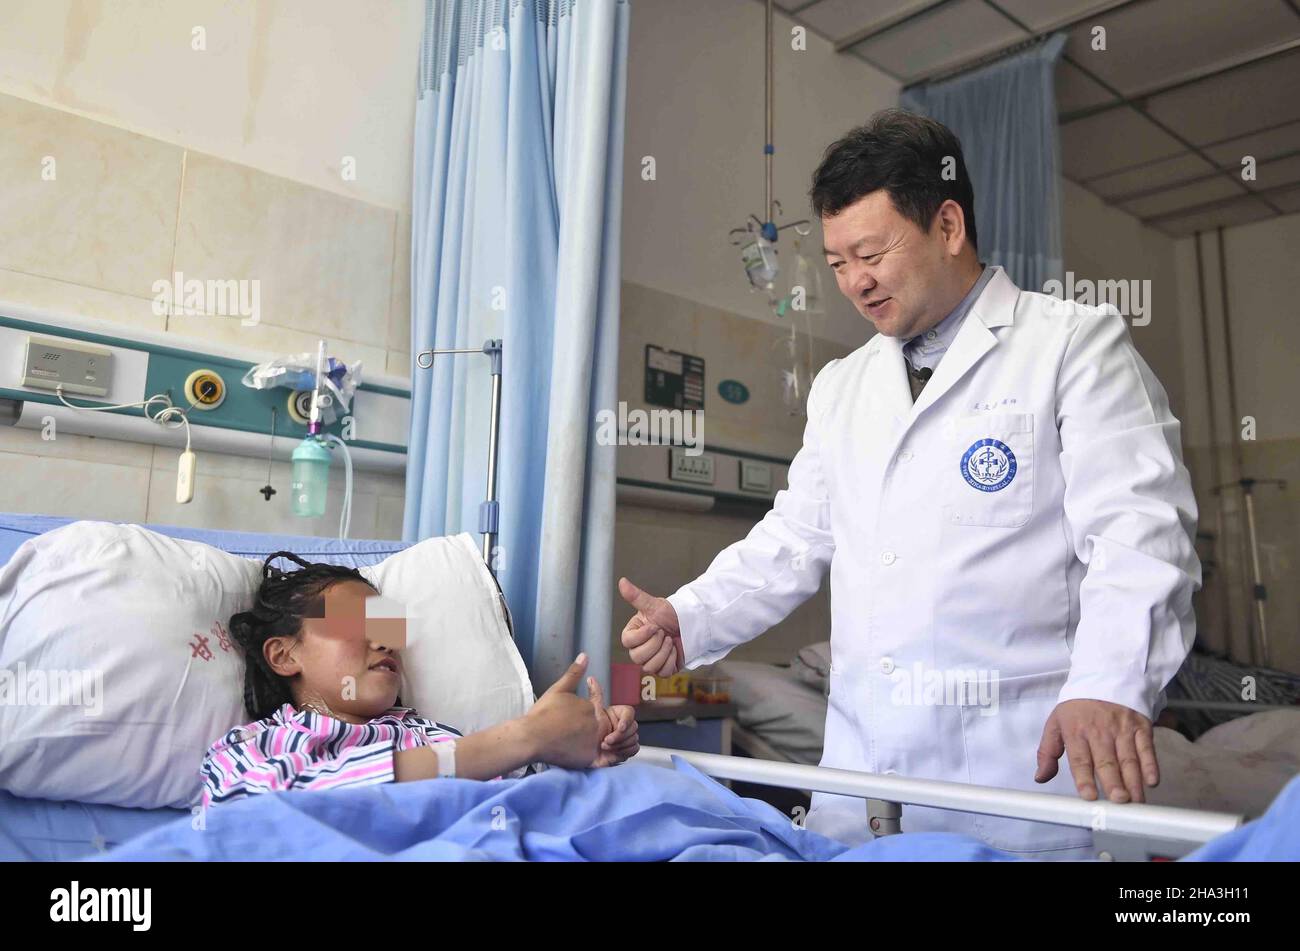 (211210) -- CHENGDU, Dec. 10, 2021 (Xinhua) -- Wang Wentao (R) gives a thumb up to a hydatid disease patient to show encouragement at a hospital in Tibetan Autonomous Prefecture of Garze, southwest China's Sichuan Province, Jan. 16, 2020. Wang Wentao, deputy director of the liver surgery department at West China Hospital of Sichuan University, started his work on the prevention and control of hydatid disease in Tibetan Autonomous Prefecture of Garze in 2006 when he learned that some local people suffer from hydatid disease during one of his free clinic tours there. Hydatid disease, or echin Stock Photo